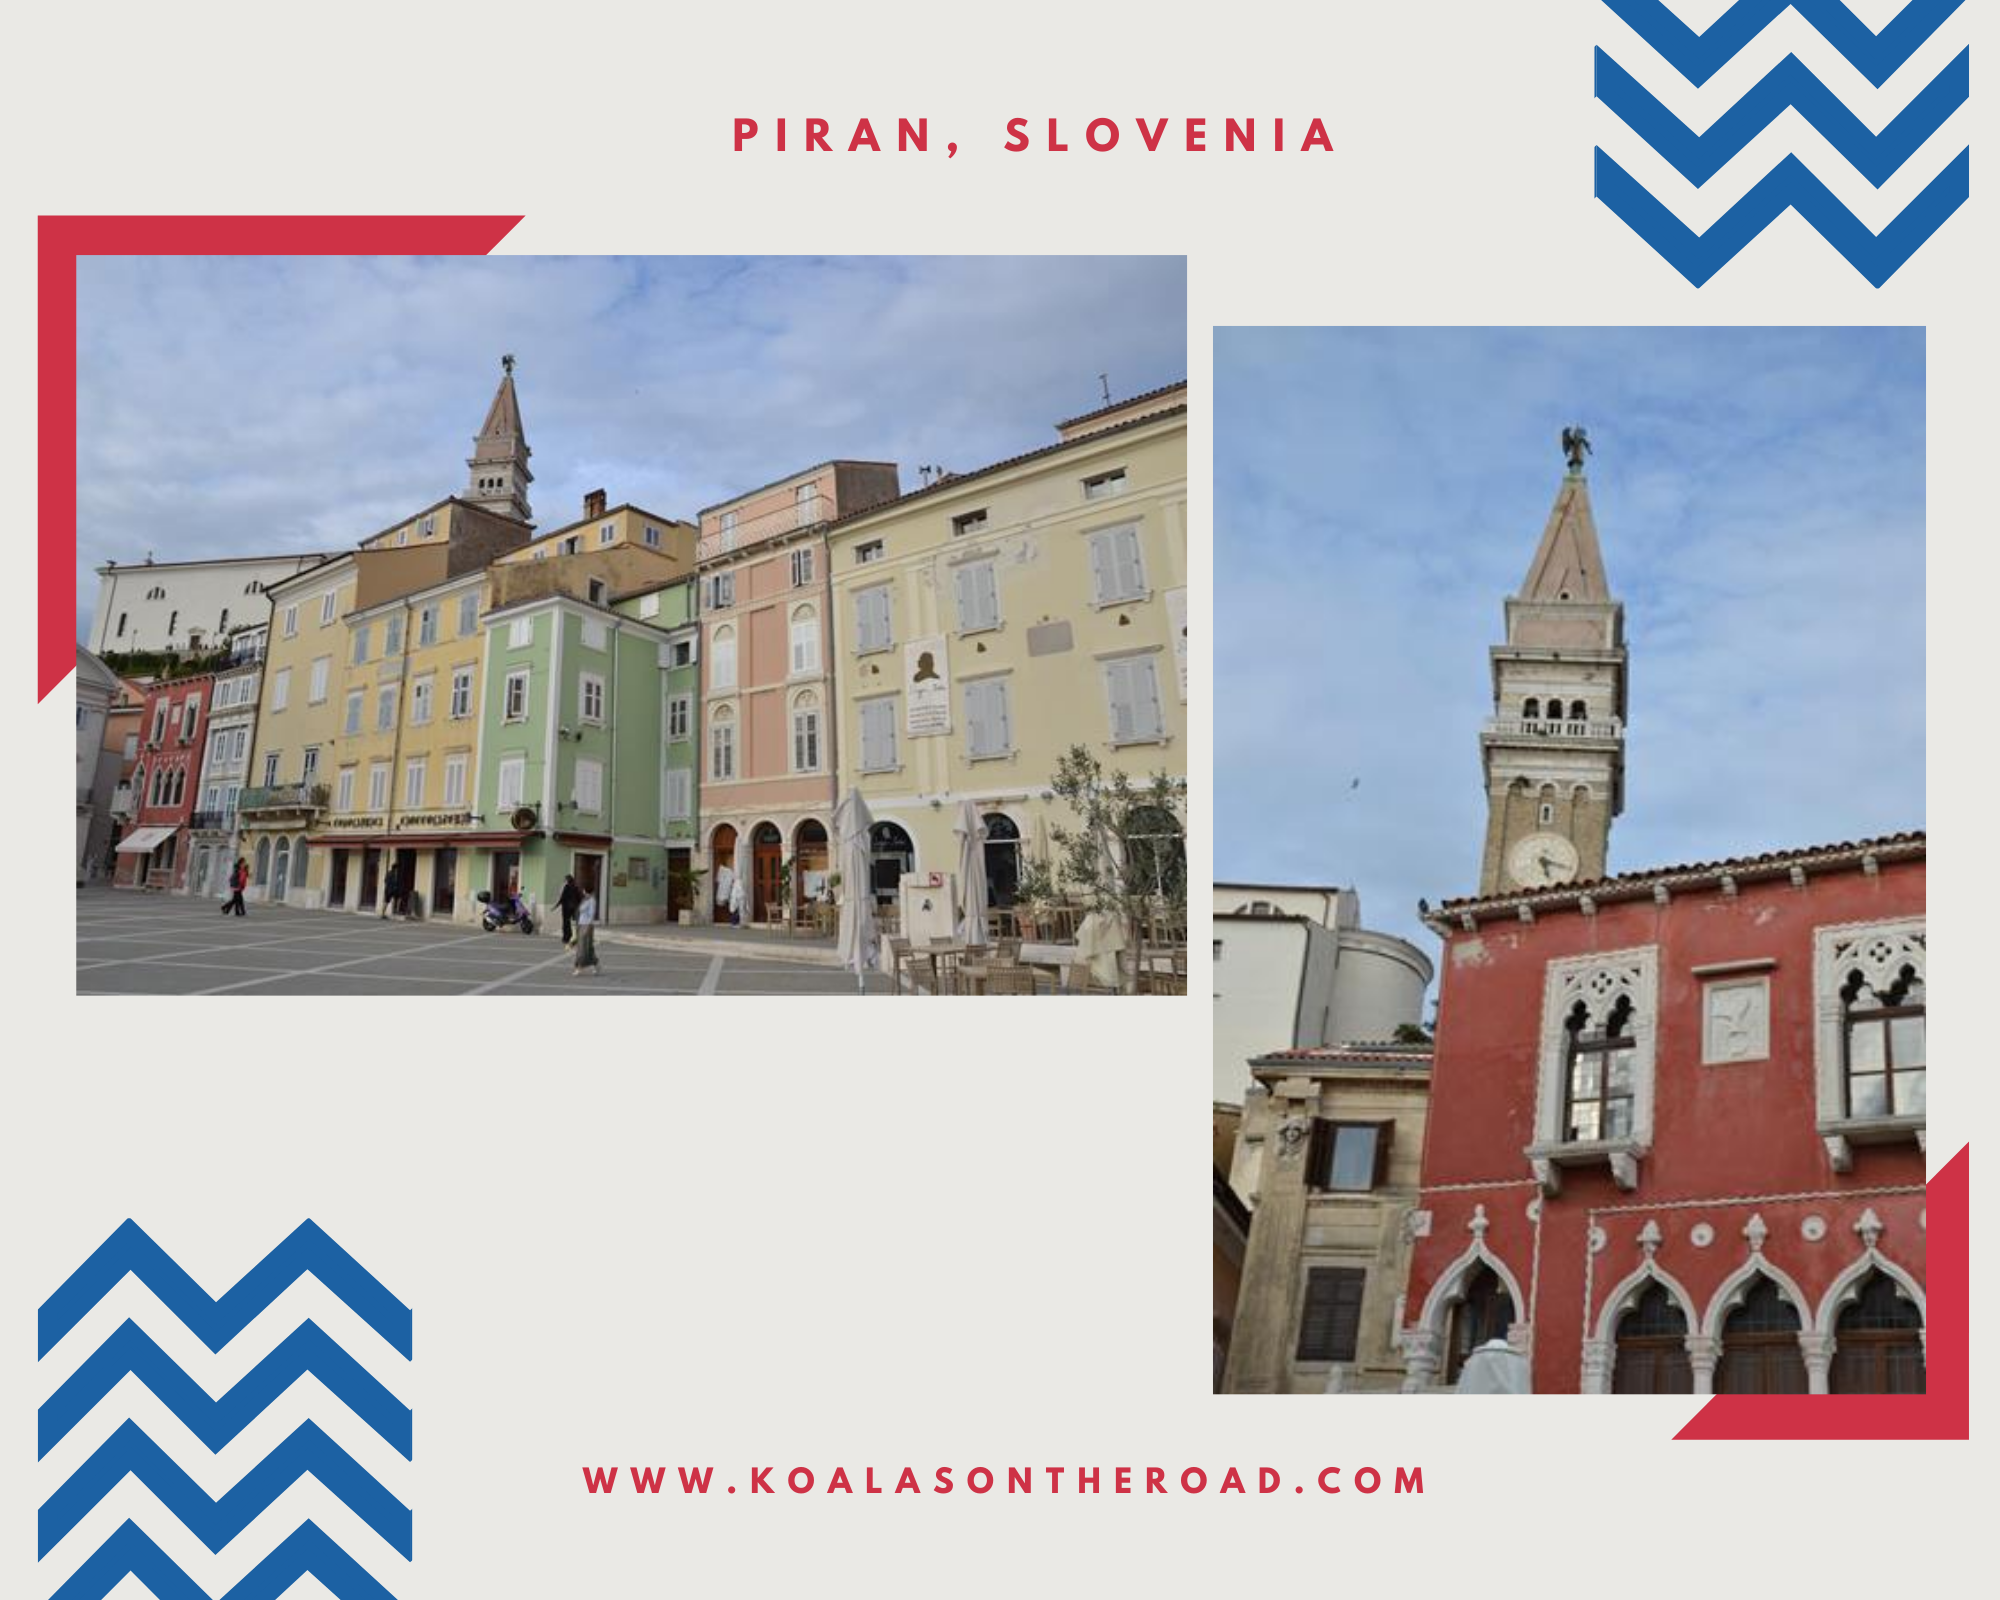 The best places to visit in Montenegro and Slovenia - Piran koalas on the road